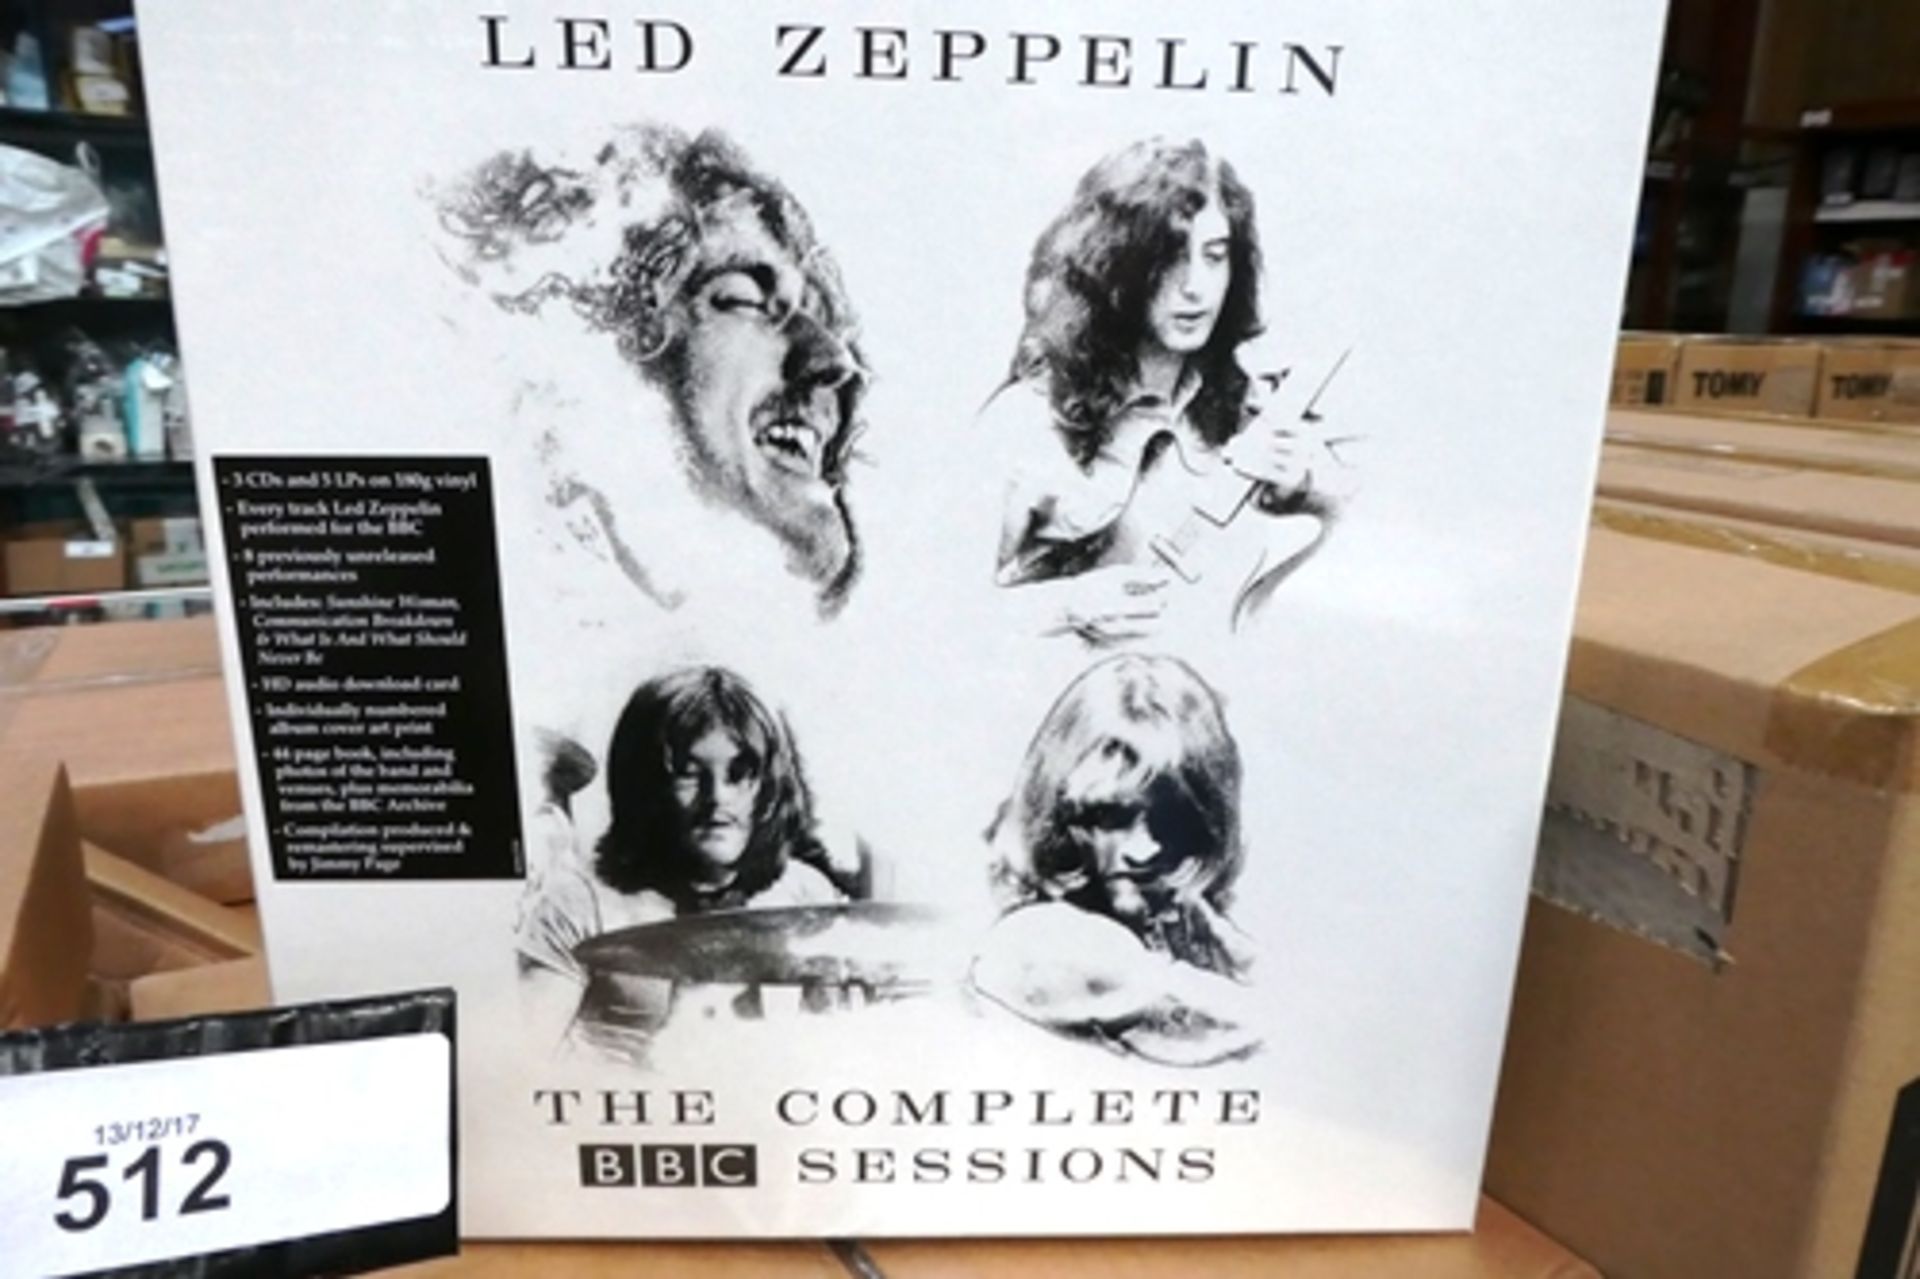 6 x Led Zeppelin the complete BBC sessions 3 CDs' and 5 LP's of 180g vinyl - Sealed new in box (